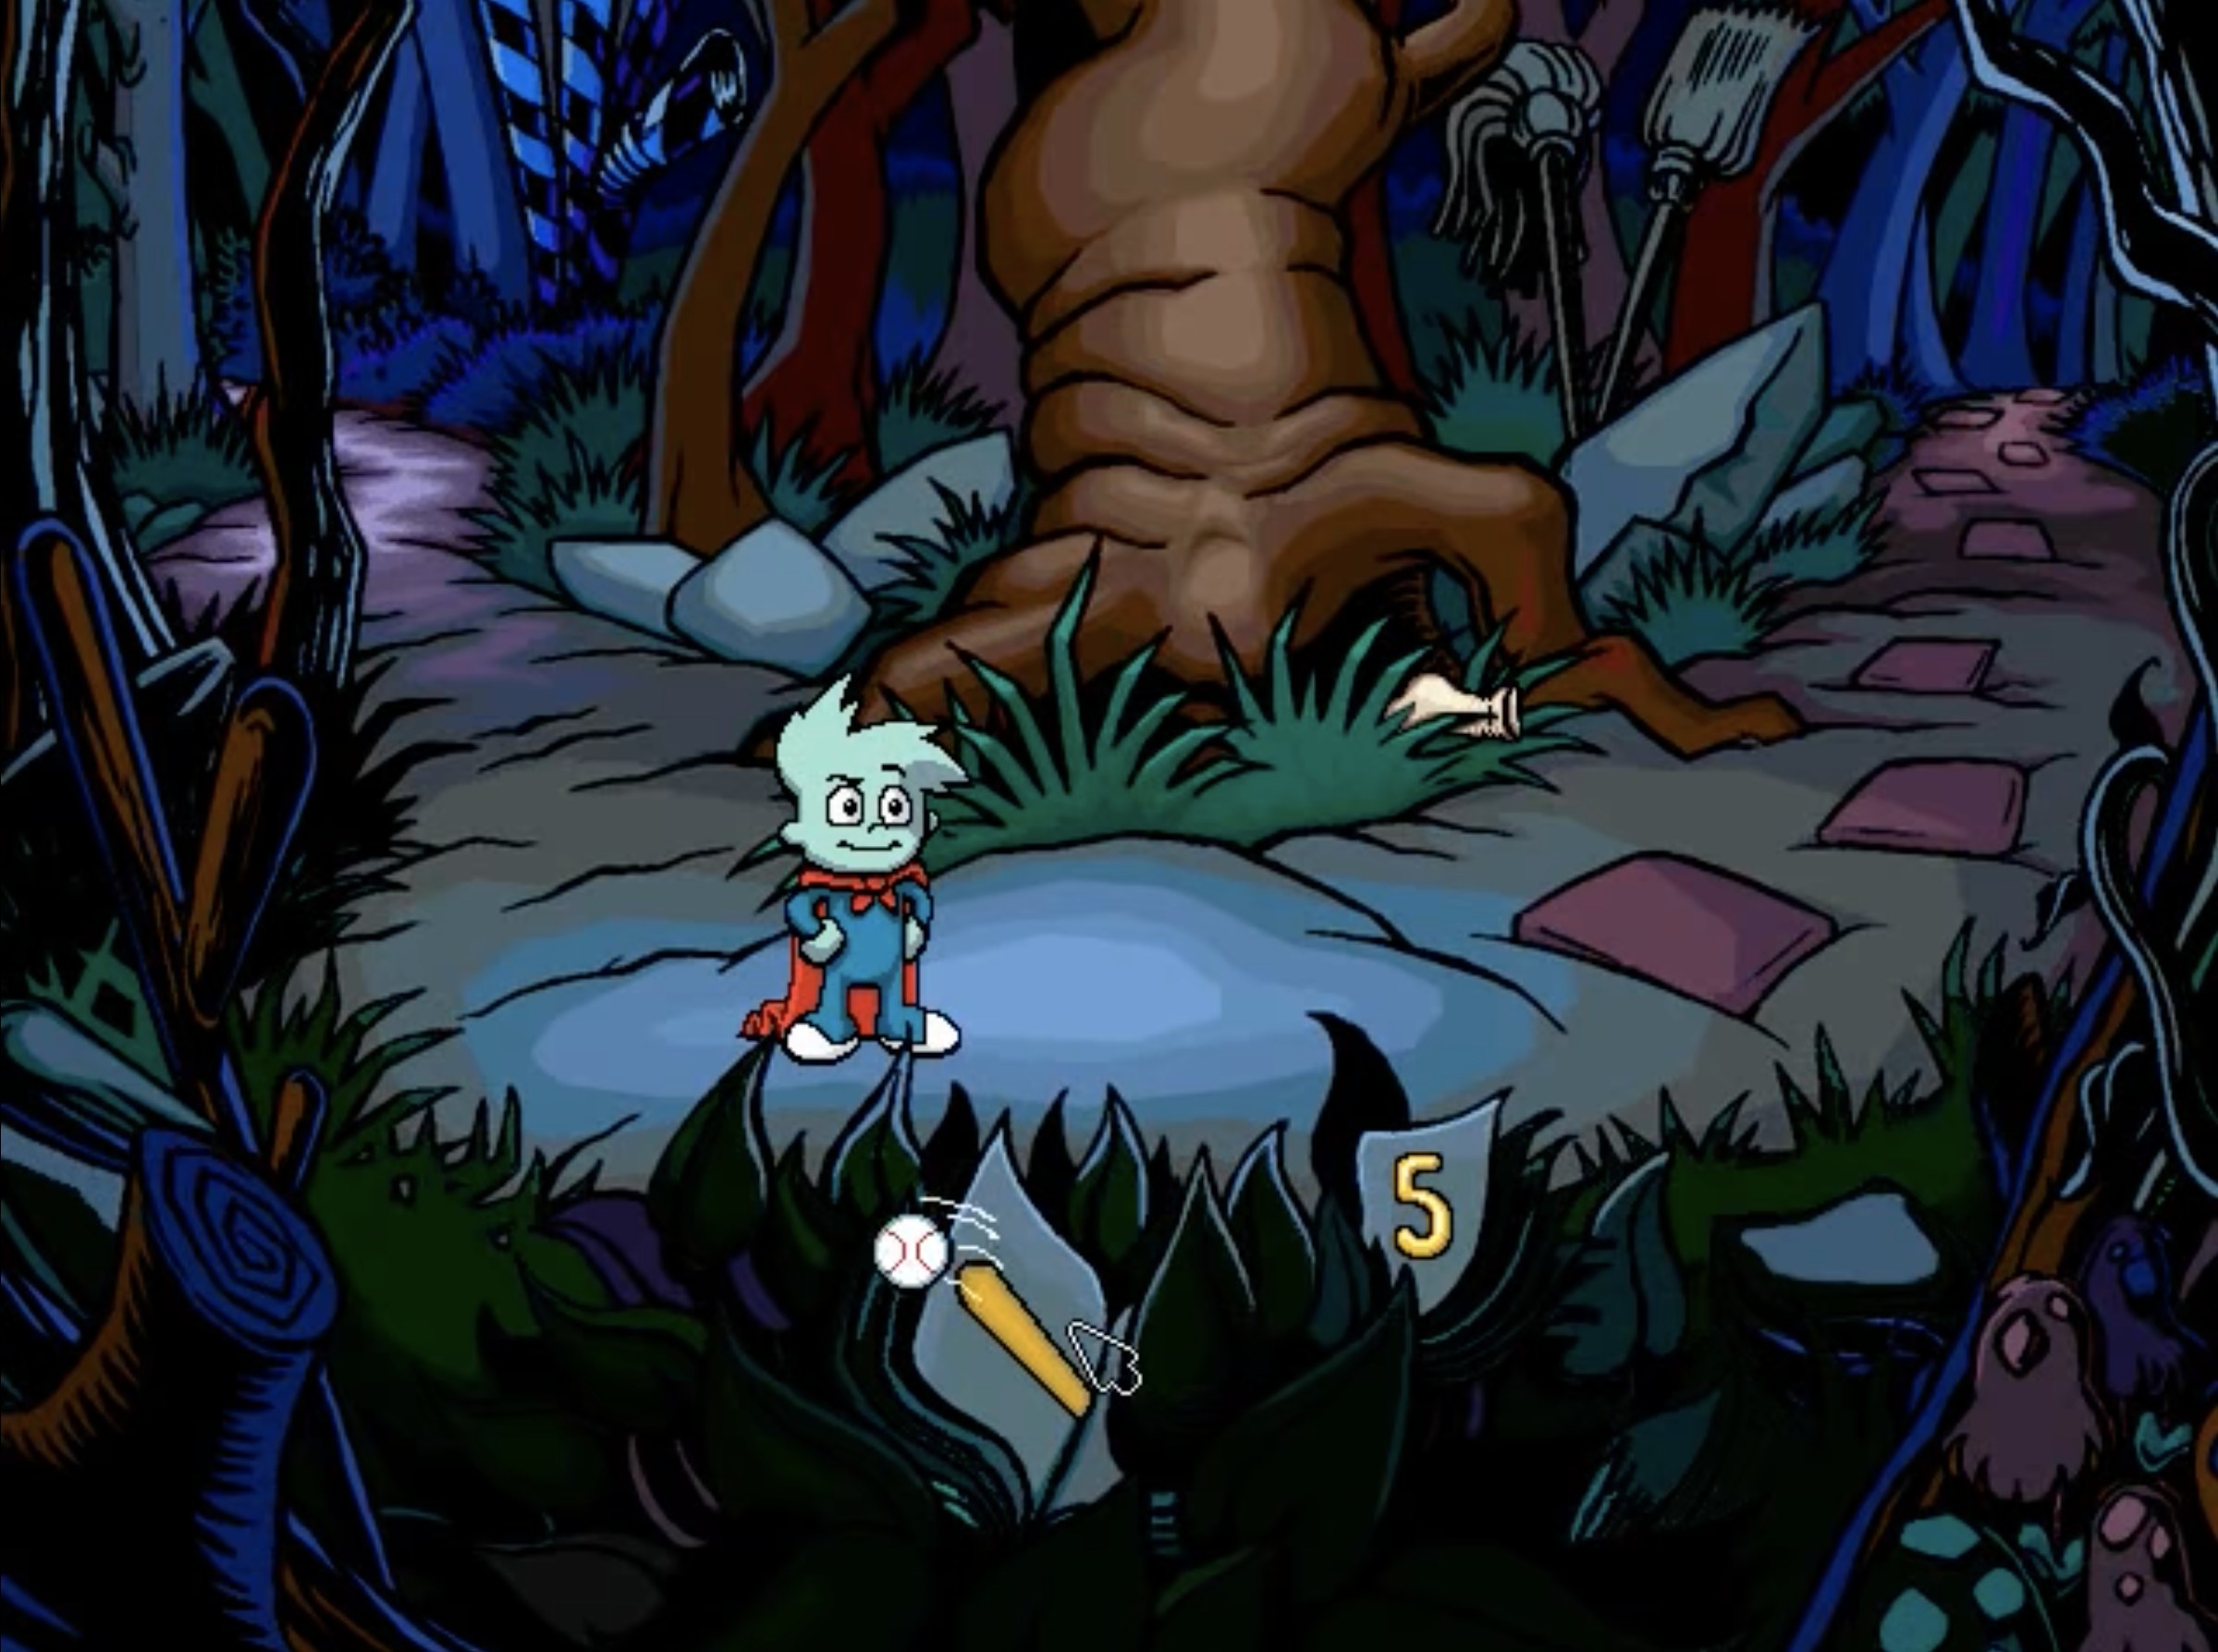 Pajama Sam stands in a creepy forest unafraid of the dark